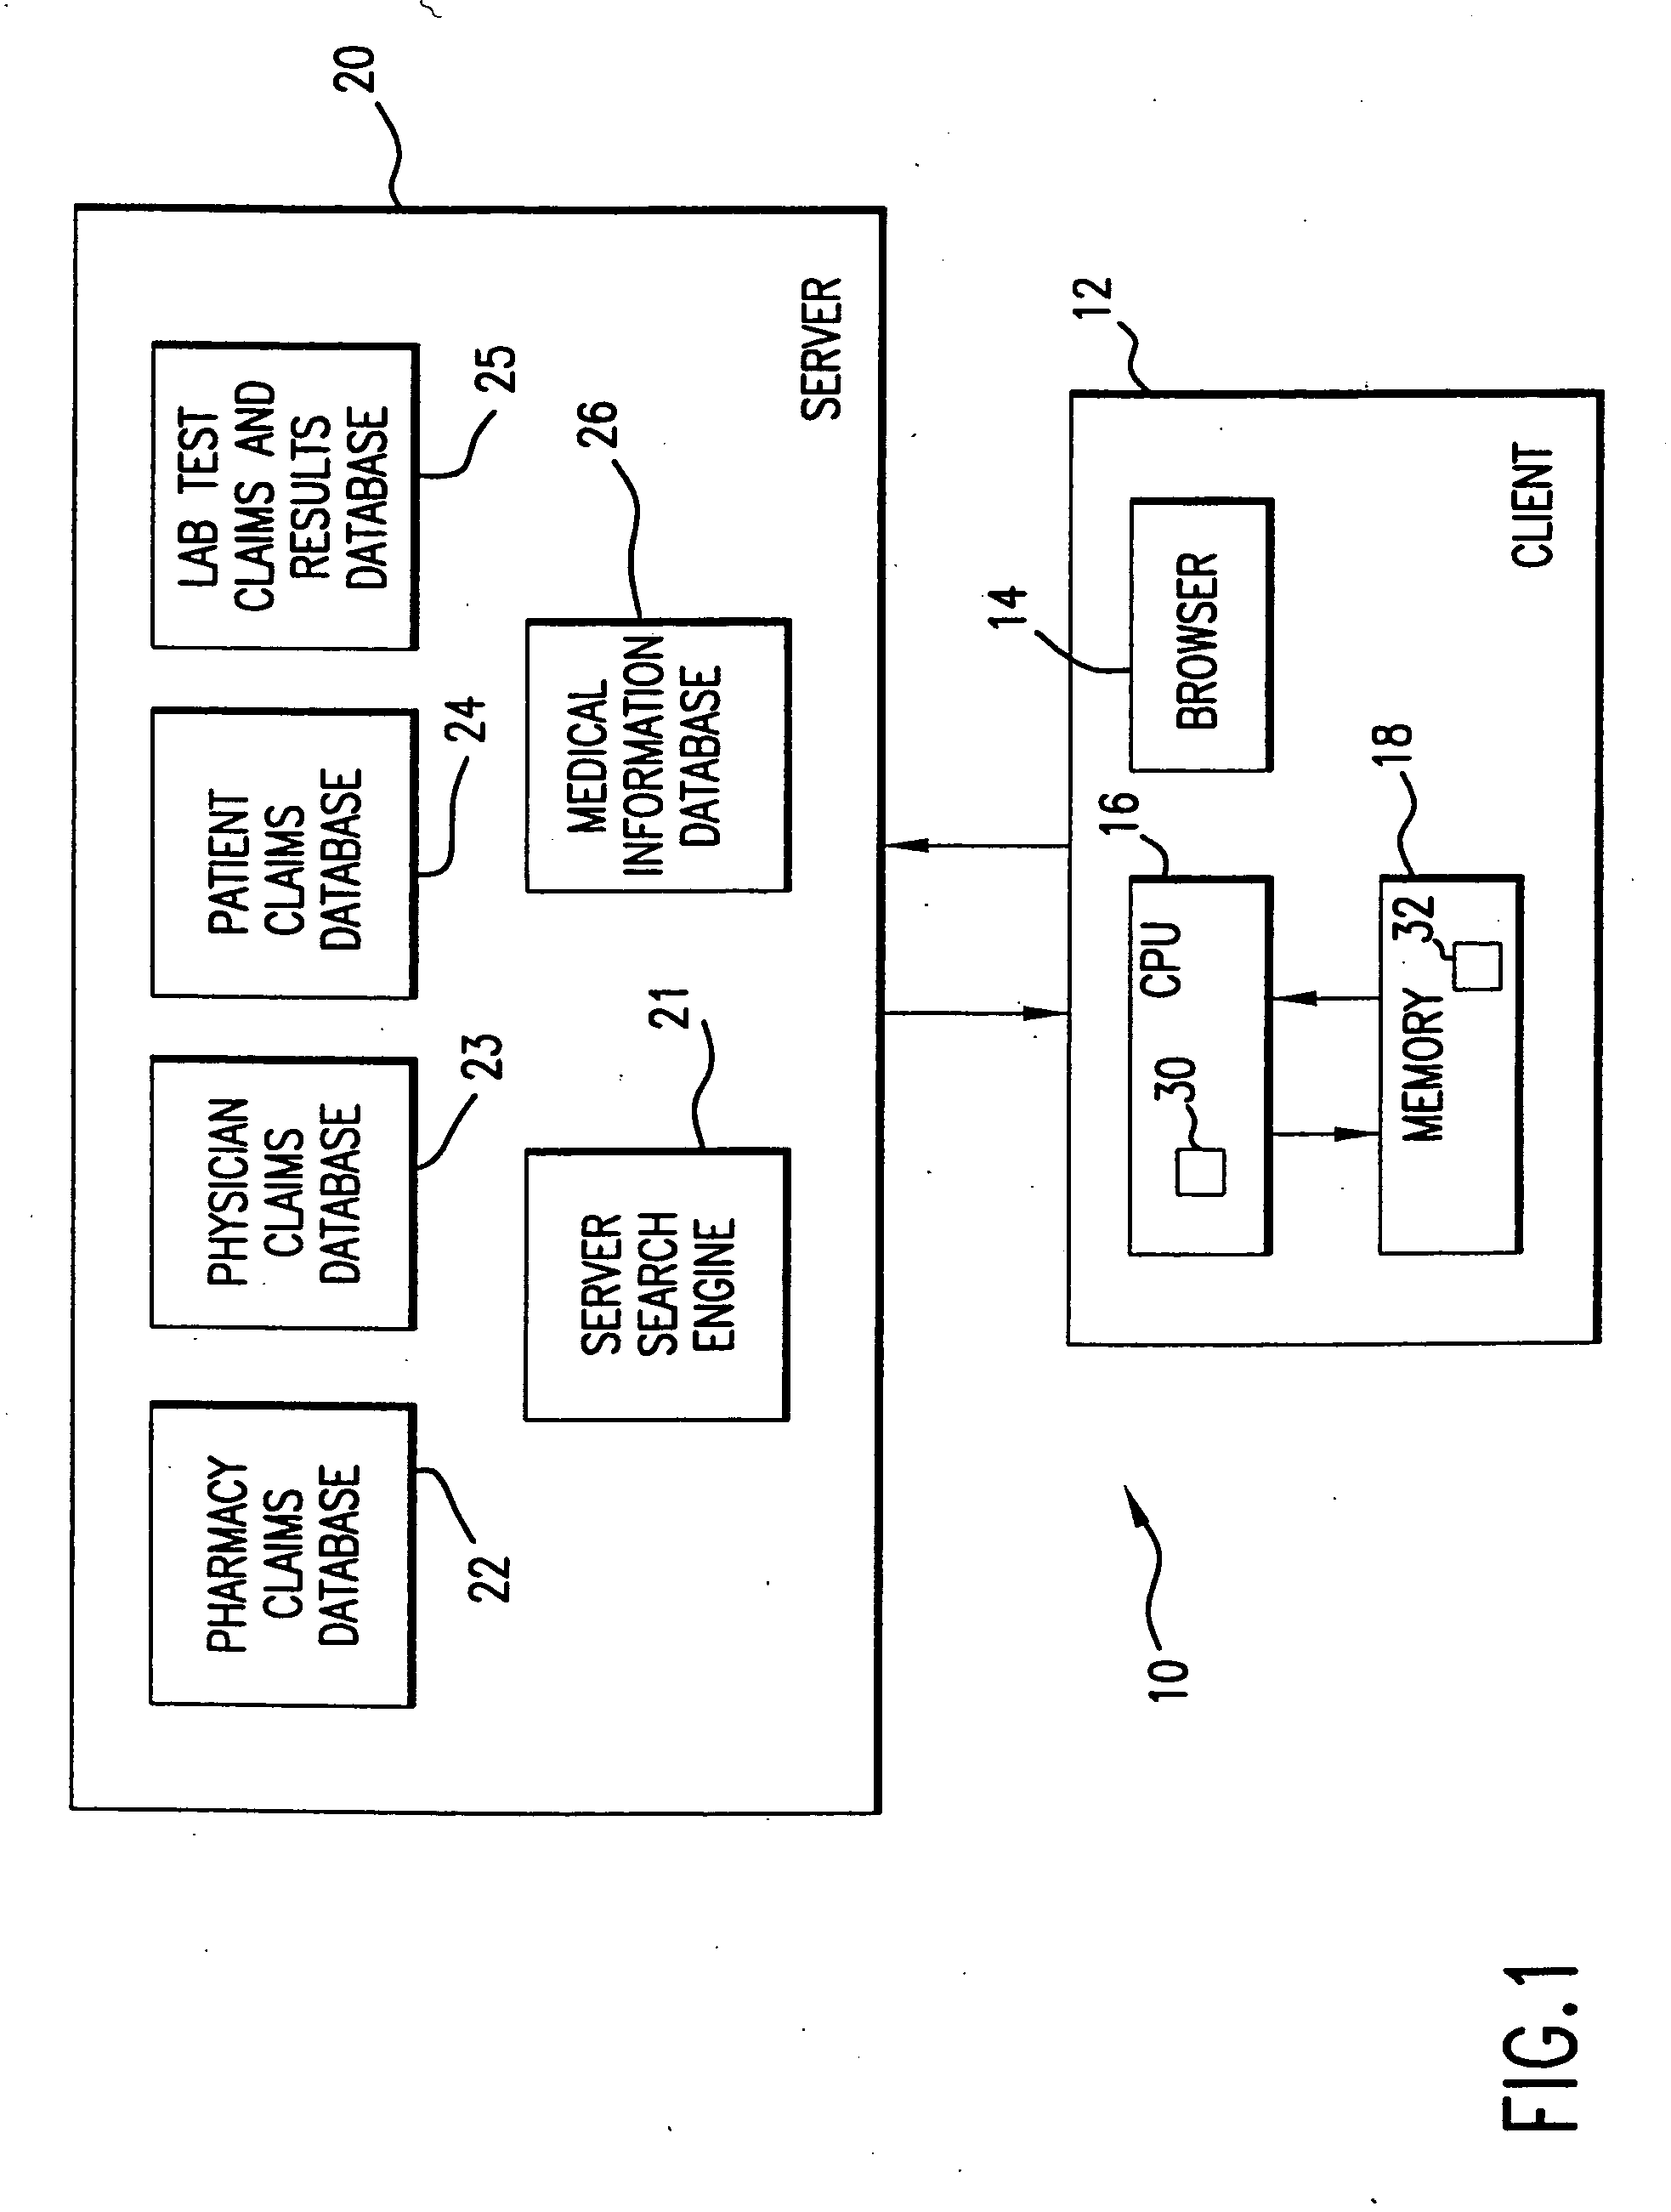 System for monitoring regulation of pharmaceuticals from data structure of medical and laboratory records